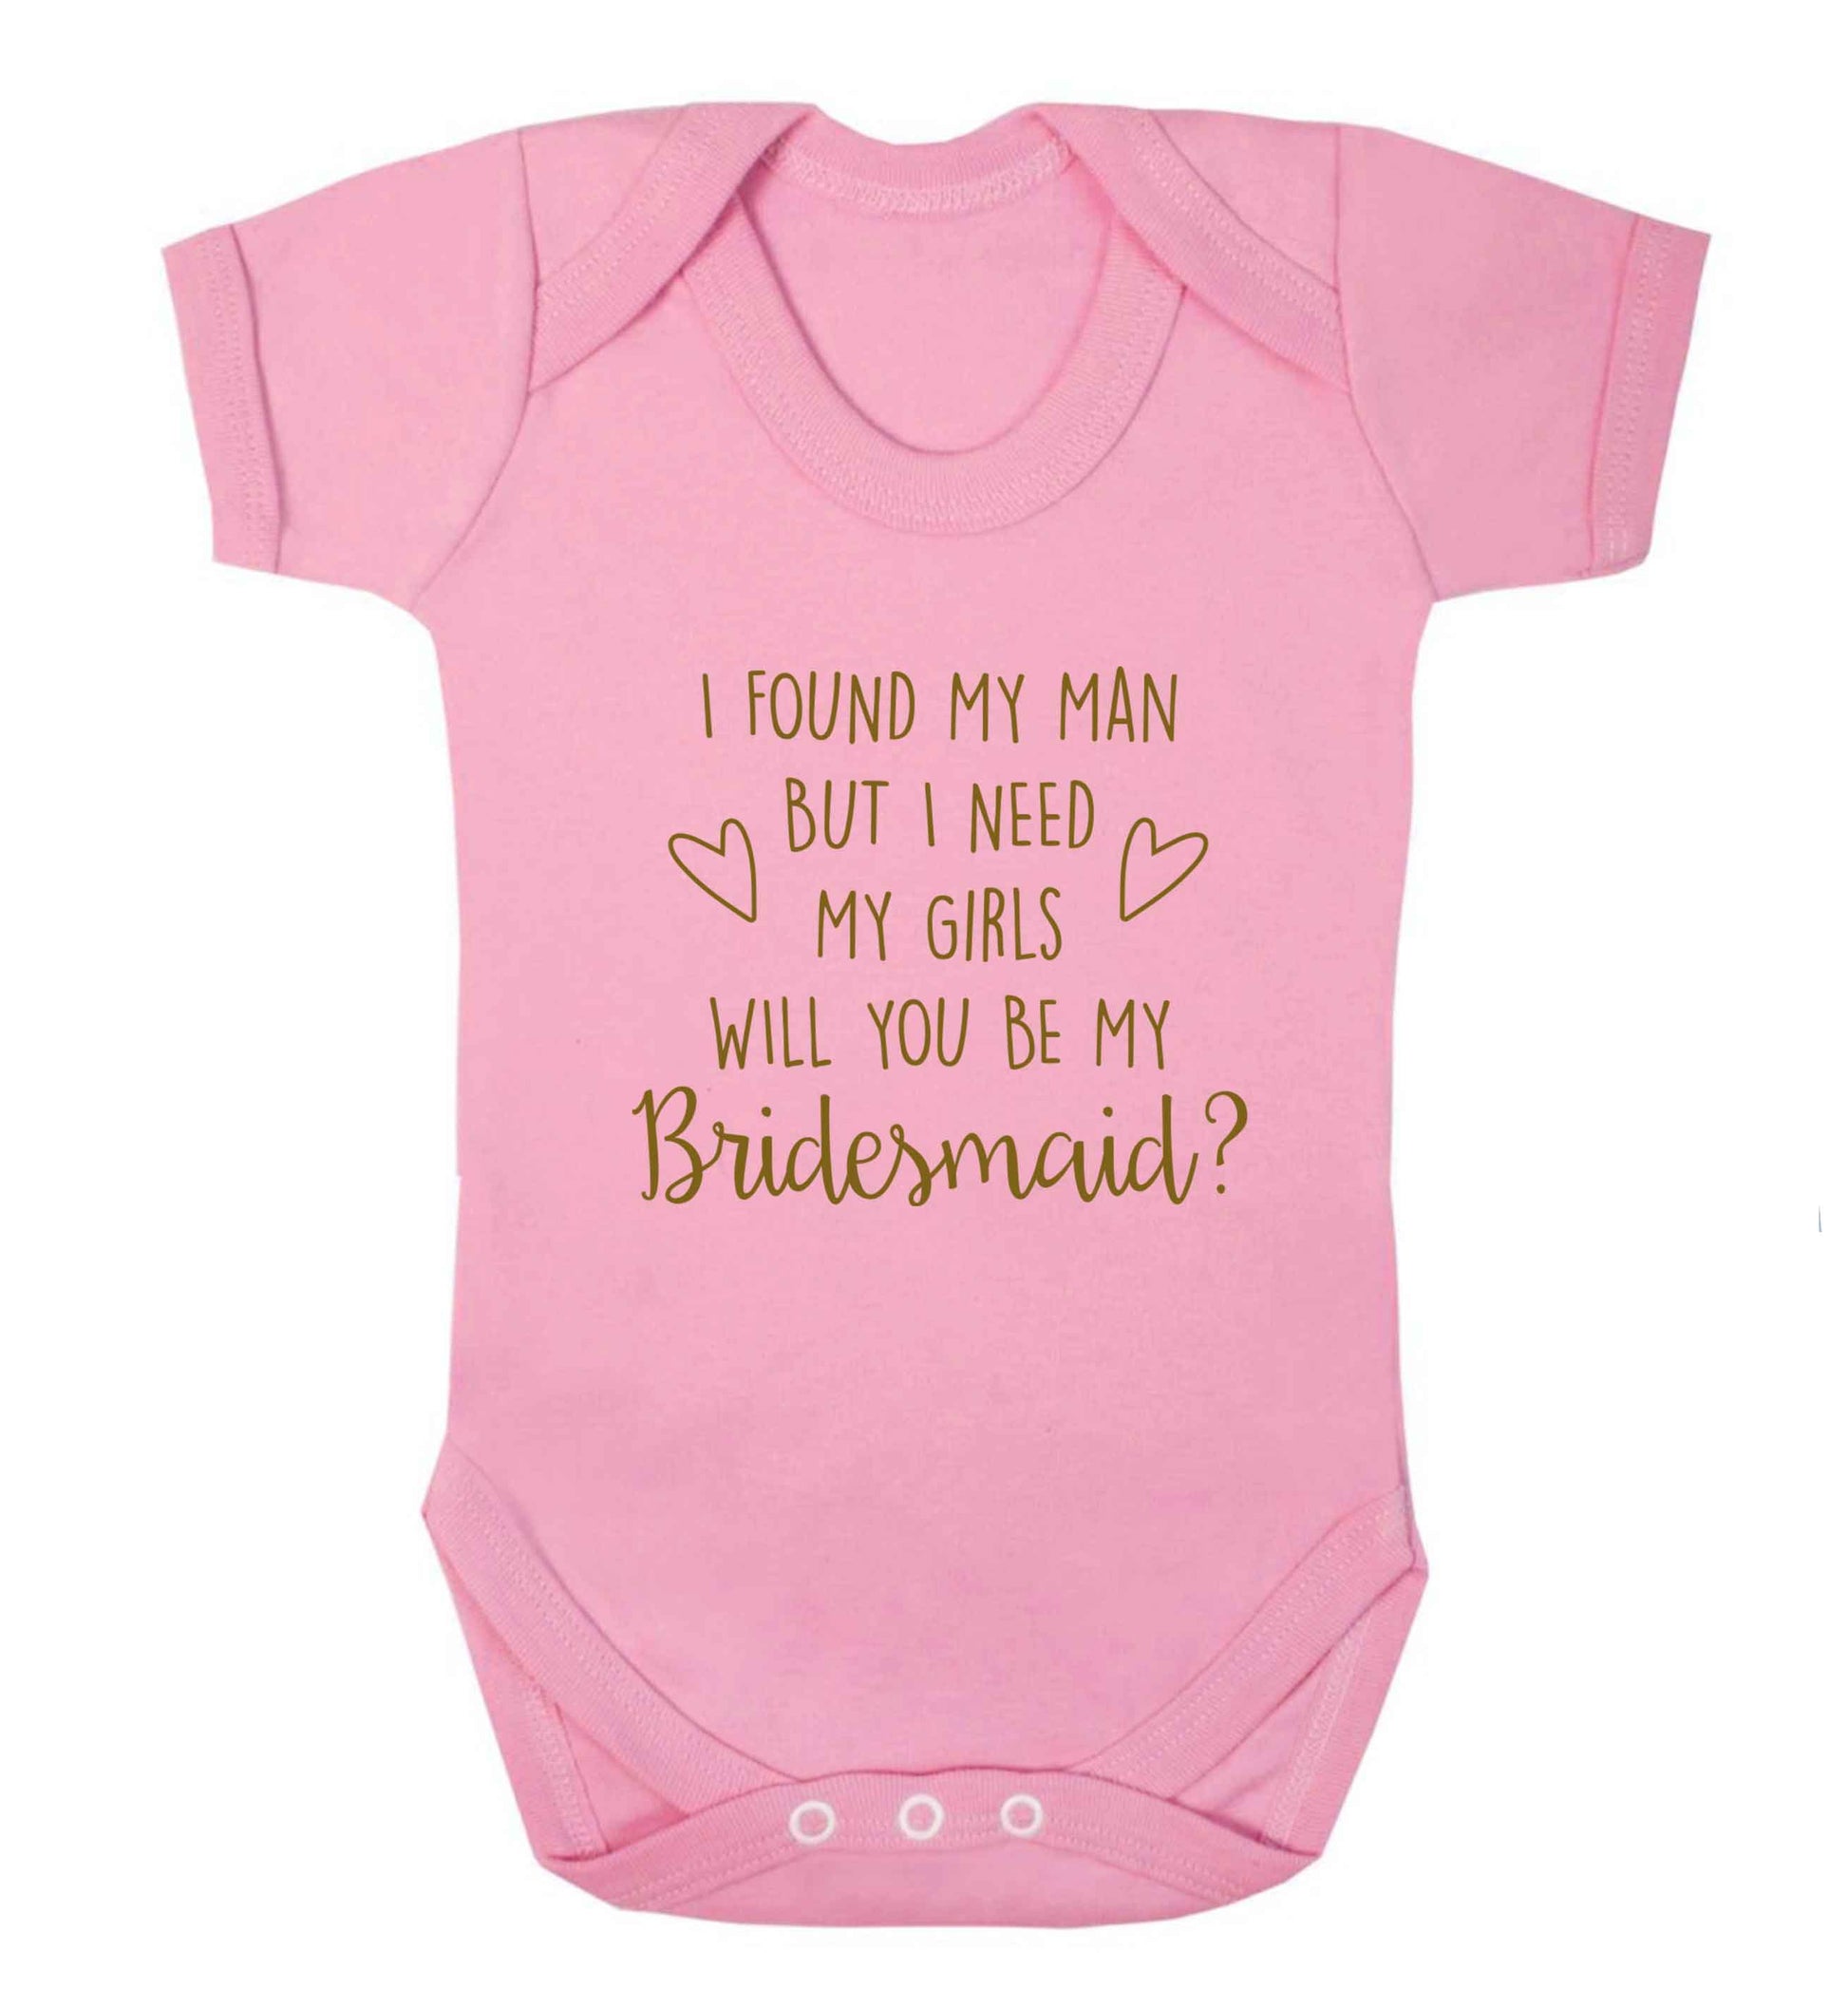 I found my man but I need my girls will you be my bridesmaid? baby vest pale pink 18-24 months